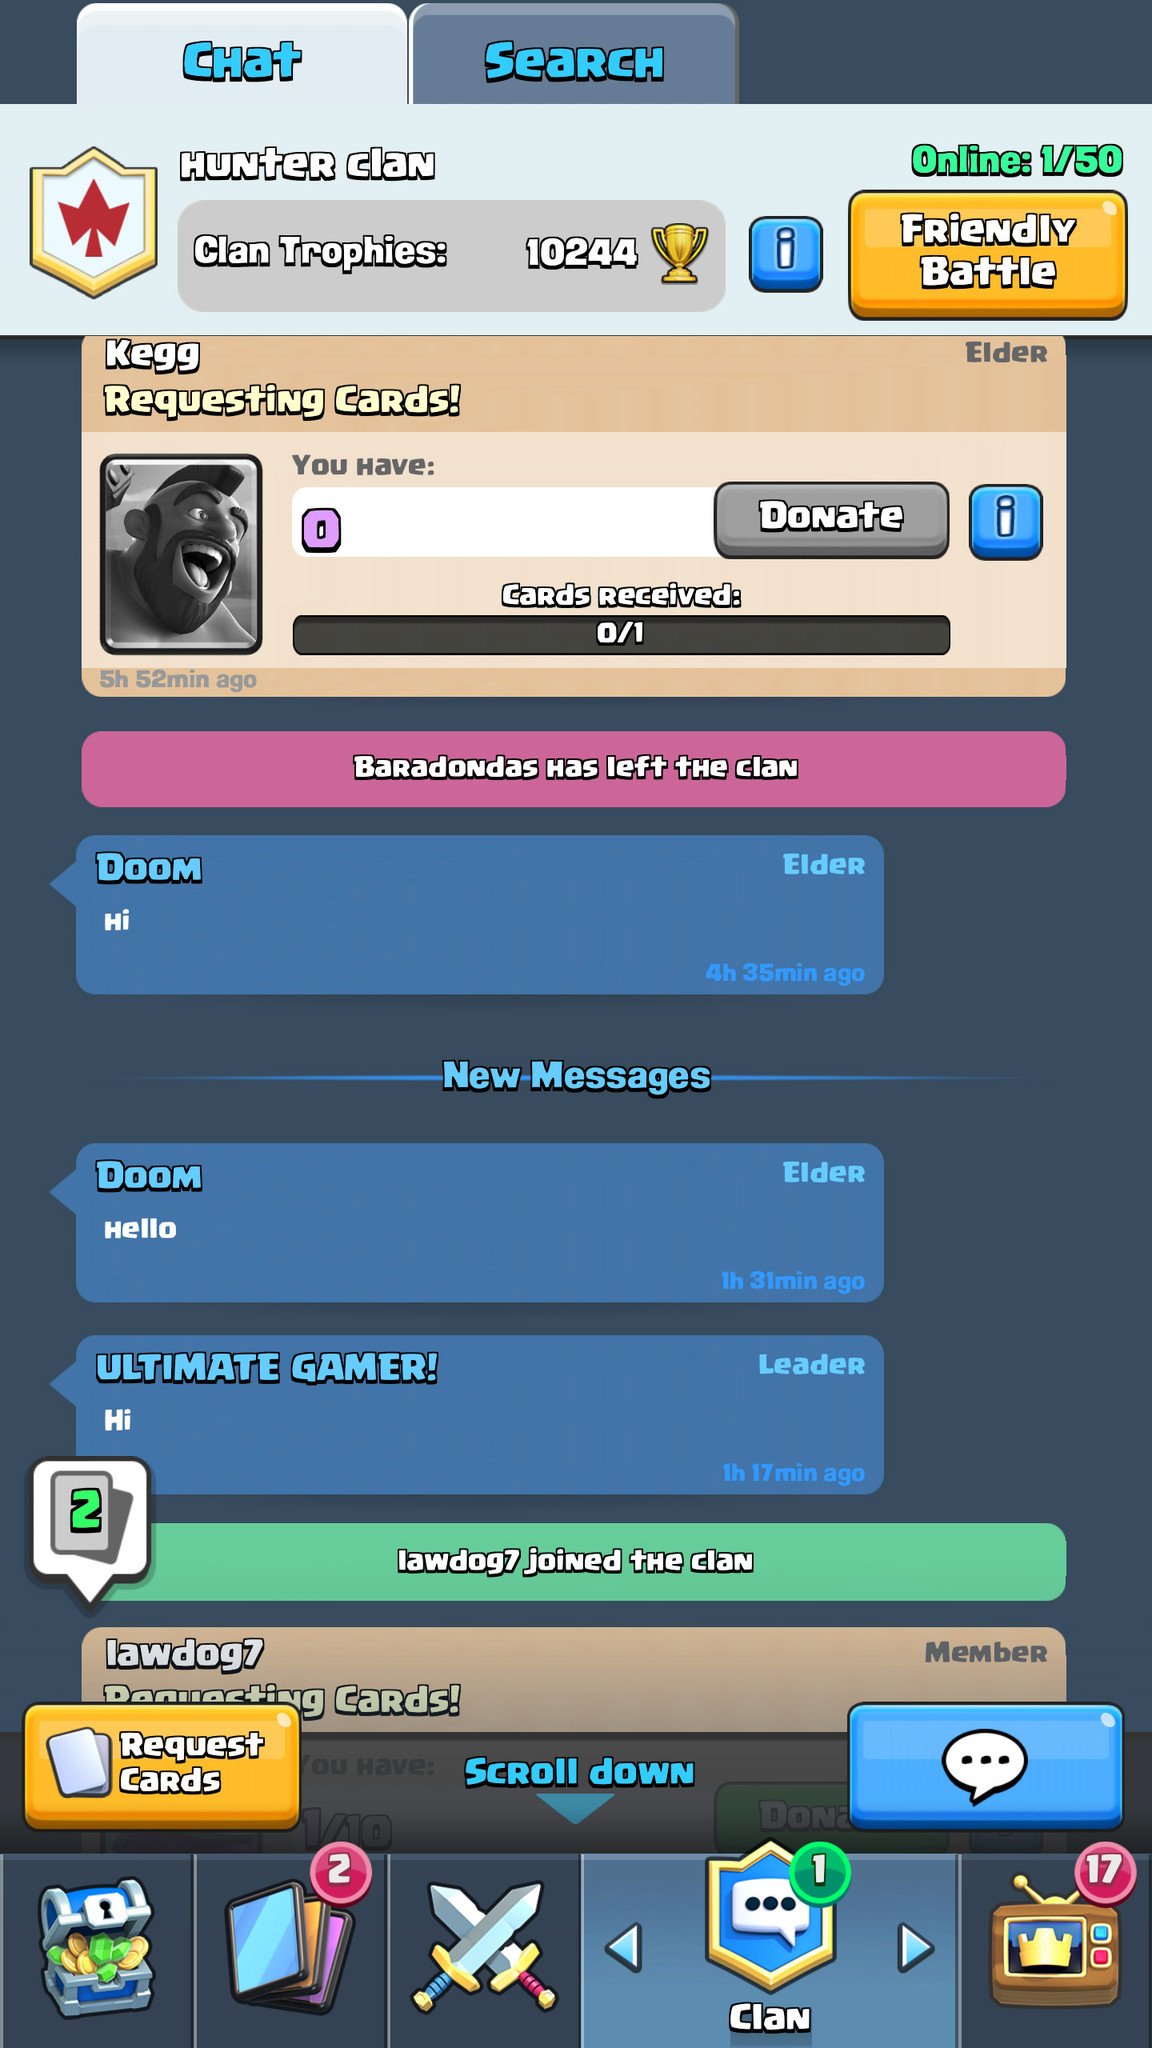 Clans are a good place to learn strategies, request cards, and level up by donating cards to Clanmates